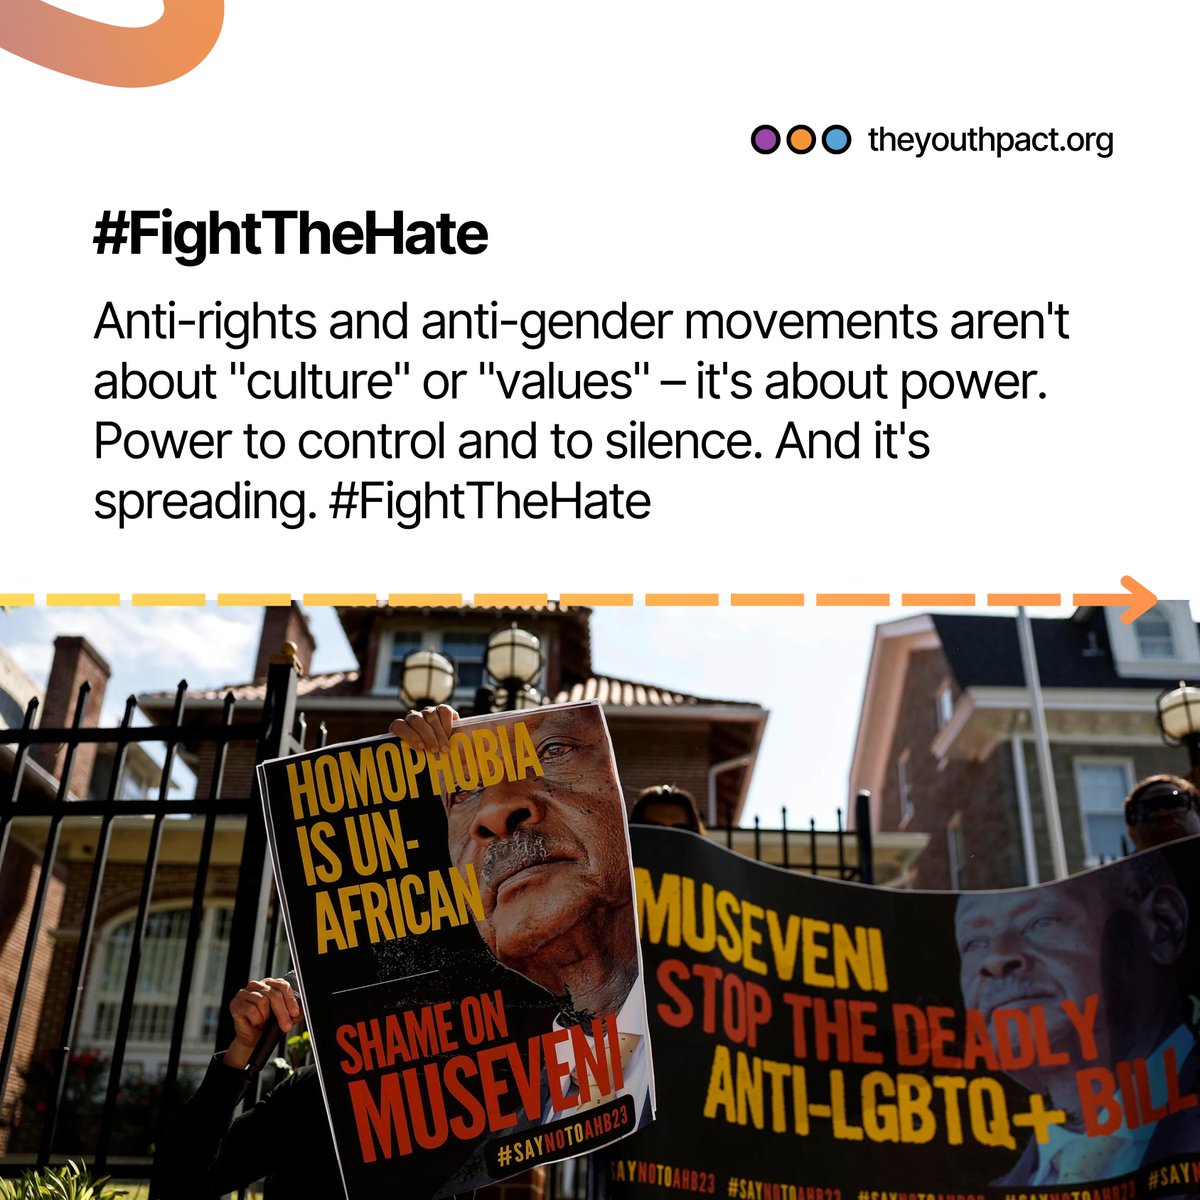 Anti-rights and anti-gender movements aren't about 'culture' or 'values' – it's about power. Power to control and to silence. And it's spreading. #FightTheHate